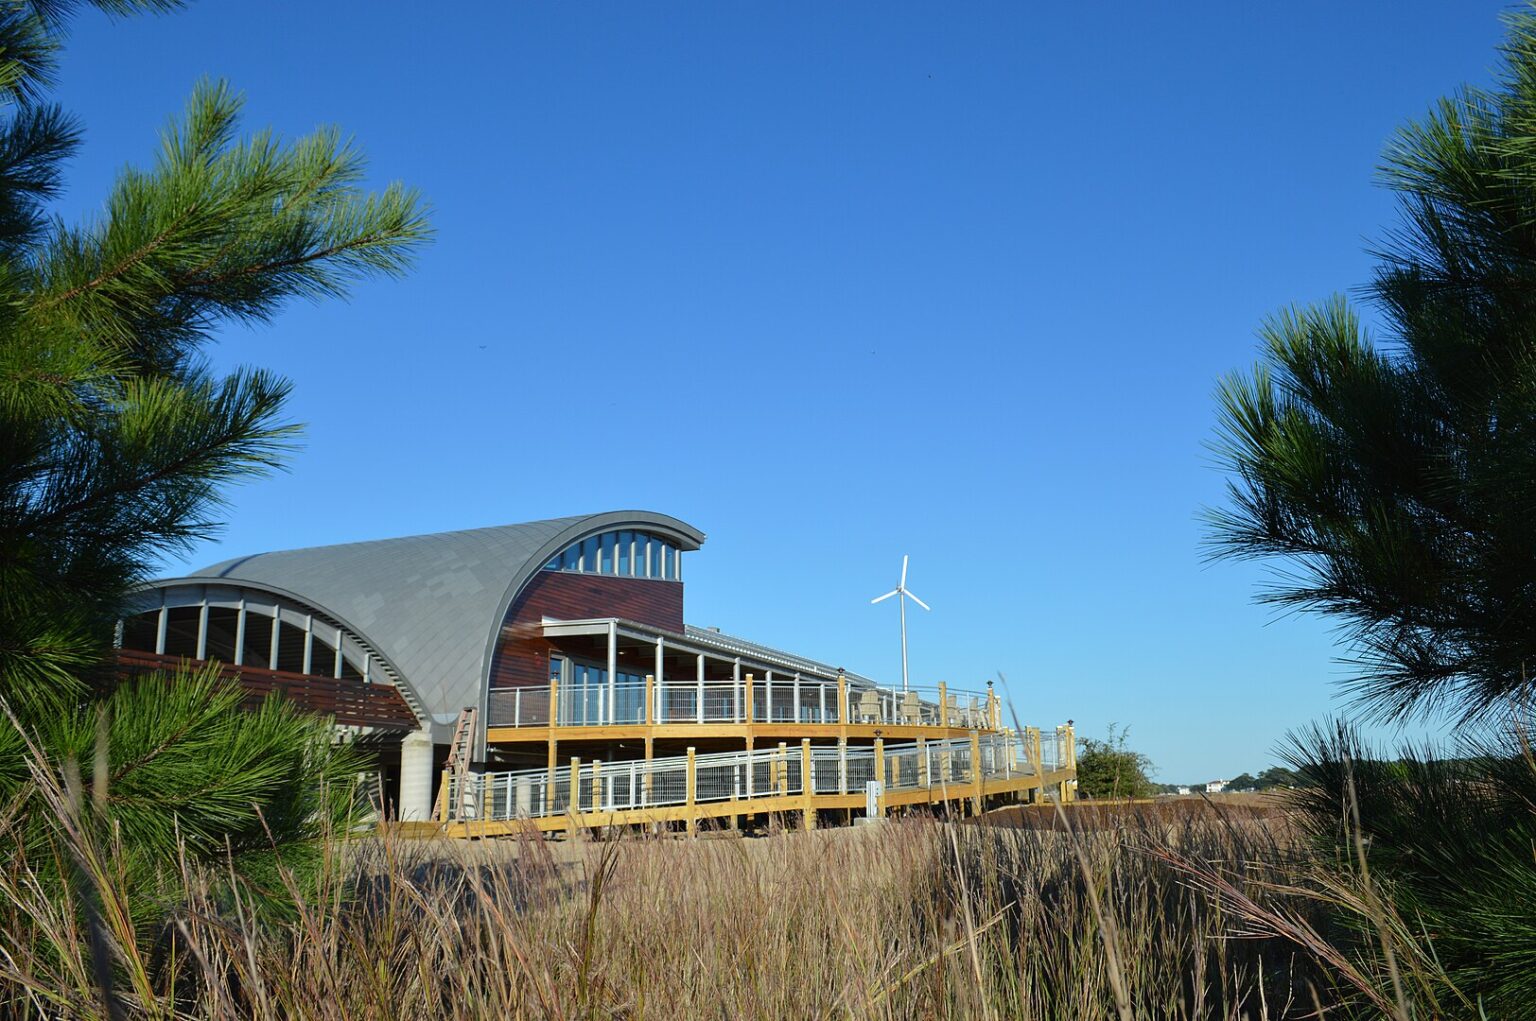 Brock Environmental Center, By Jwallace72 - Own work, CC BY-SA 4.0, https://commons.wikimedia.org/w/index.php?curid=38048661